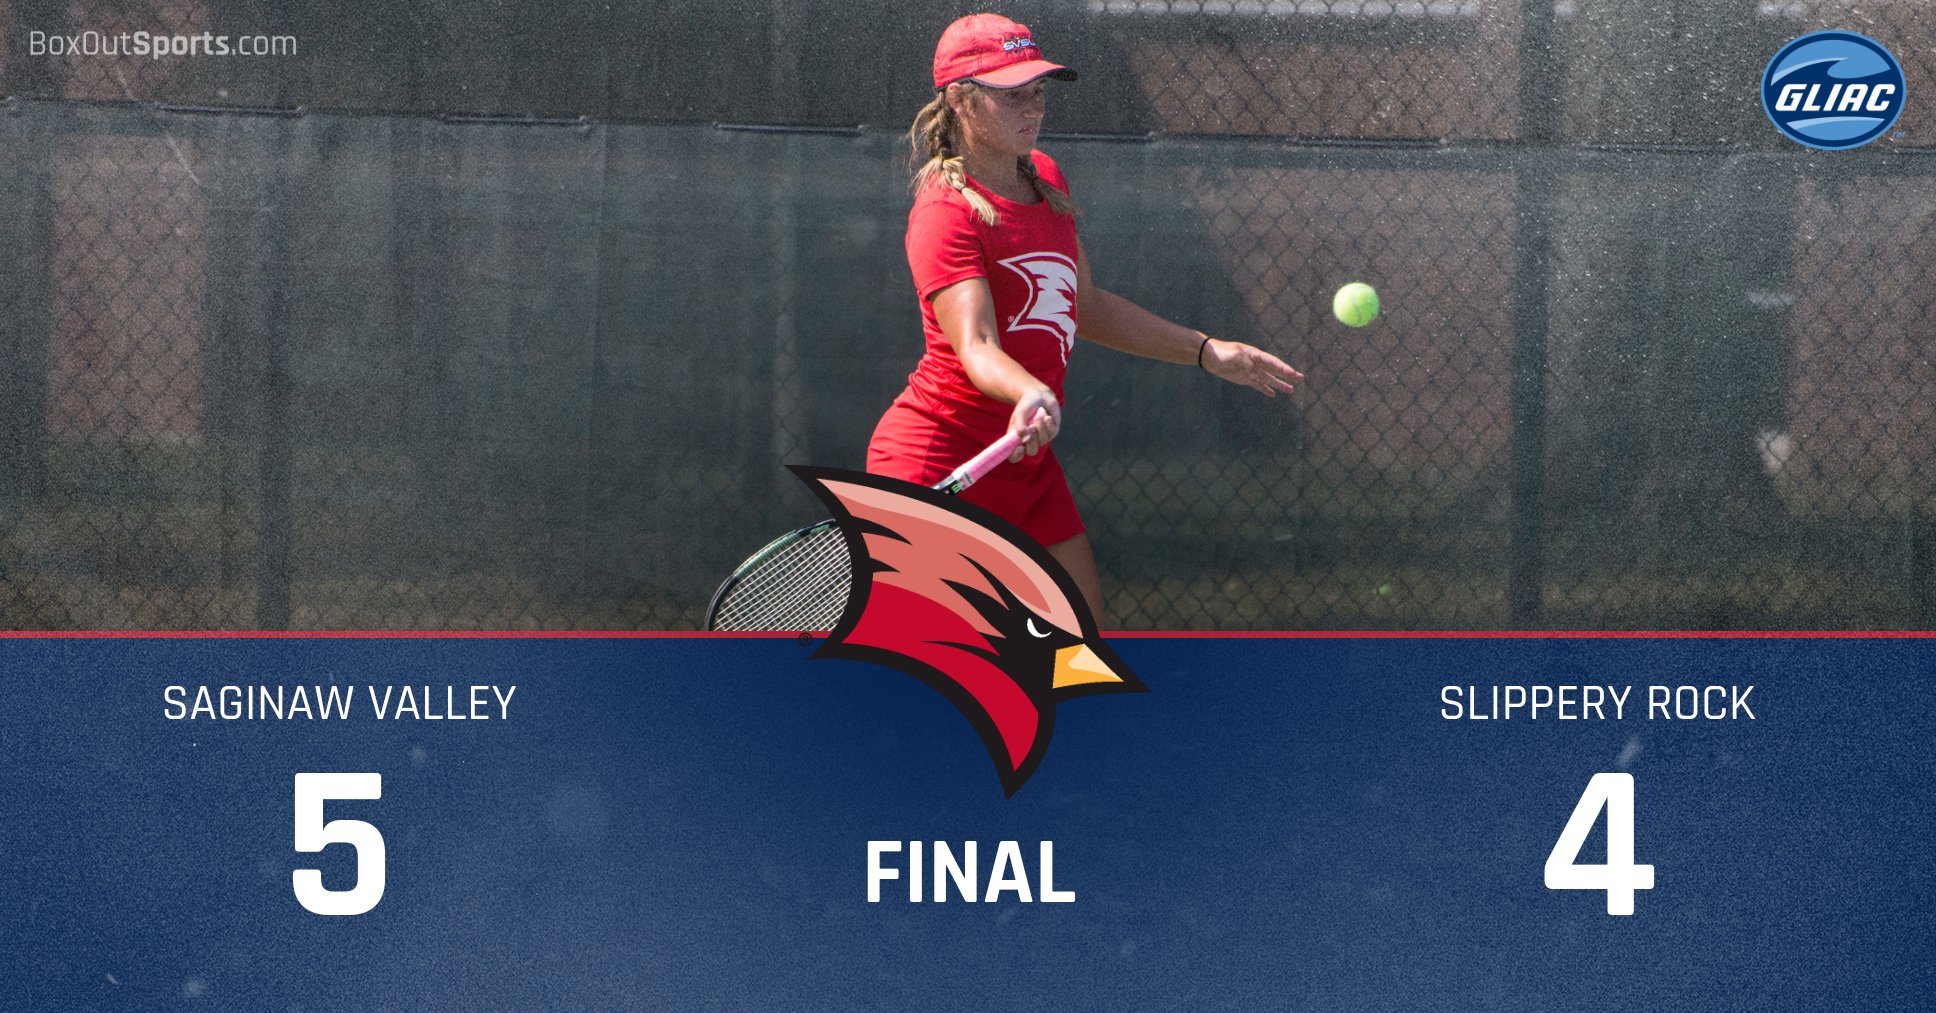 Tennis fights for 5-4 victory over Slippery Rock